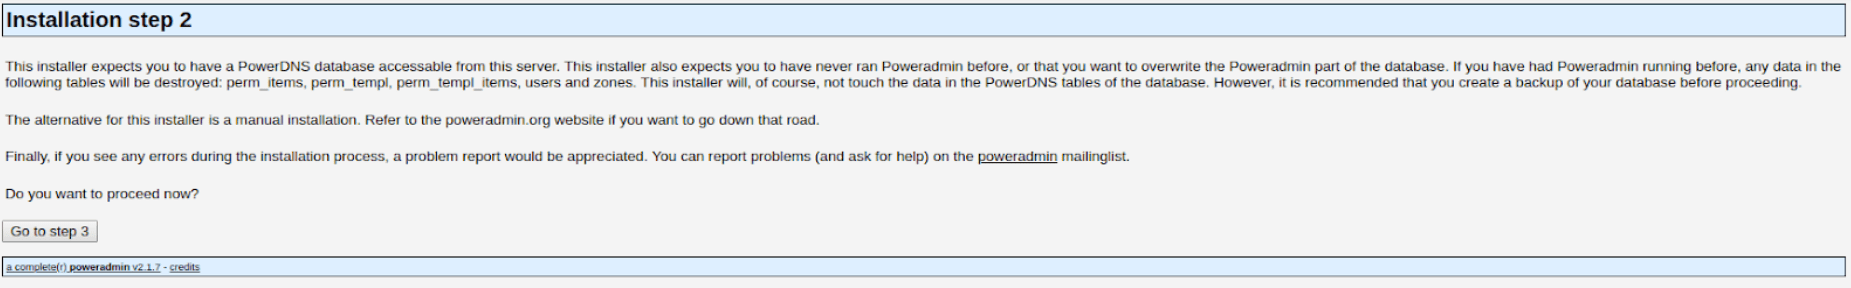 To install Poweradmin you must first acknowledge its warning.